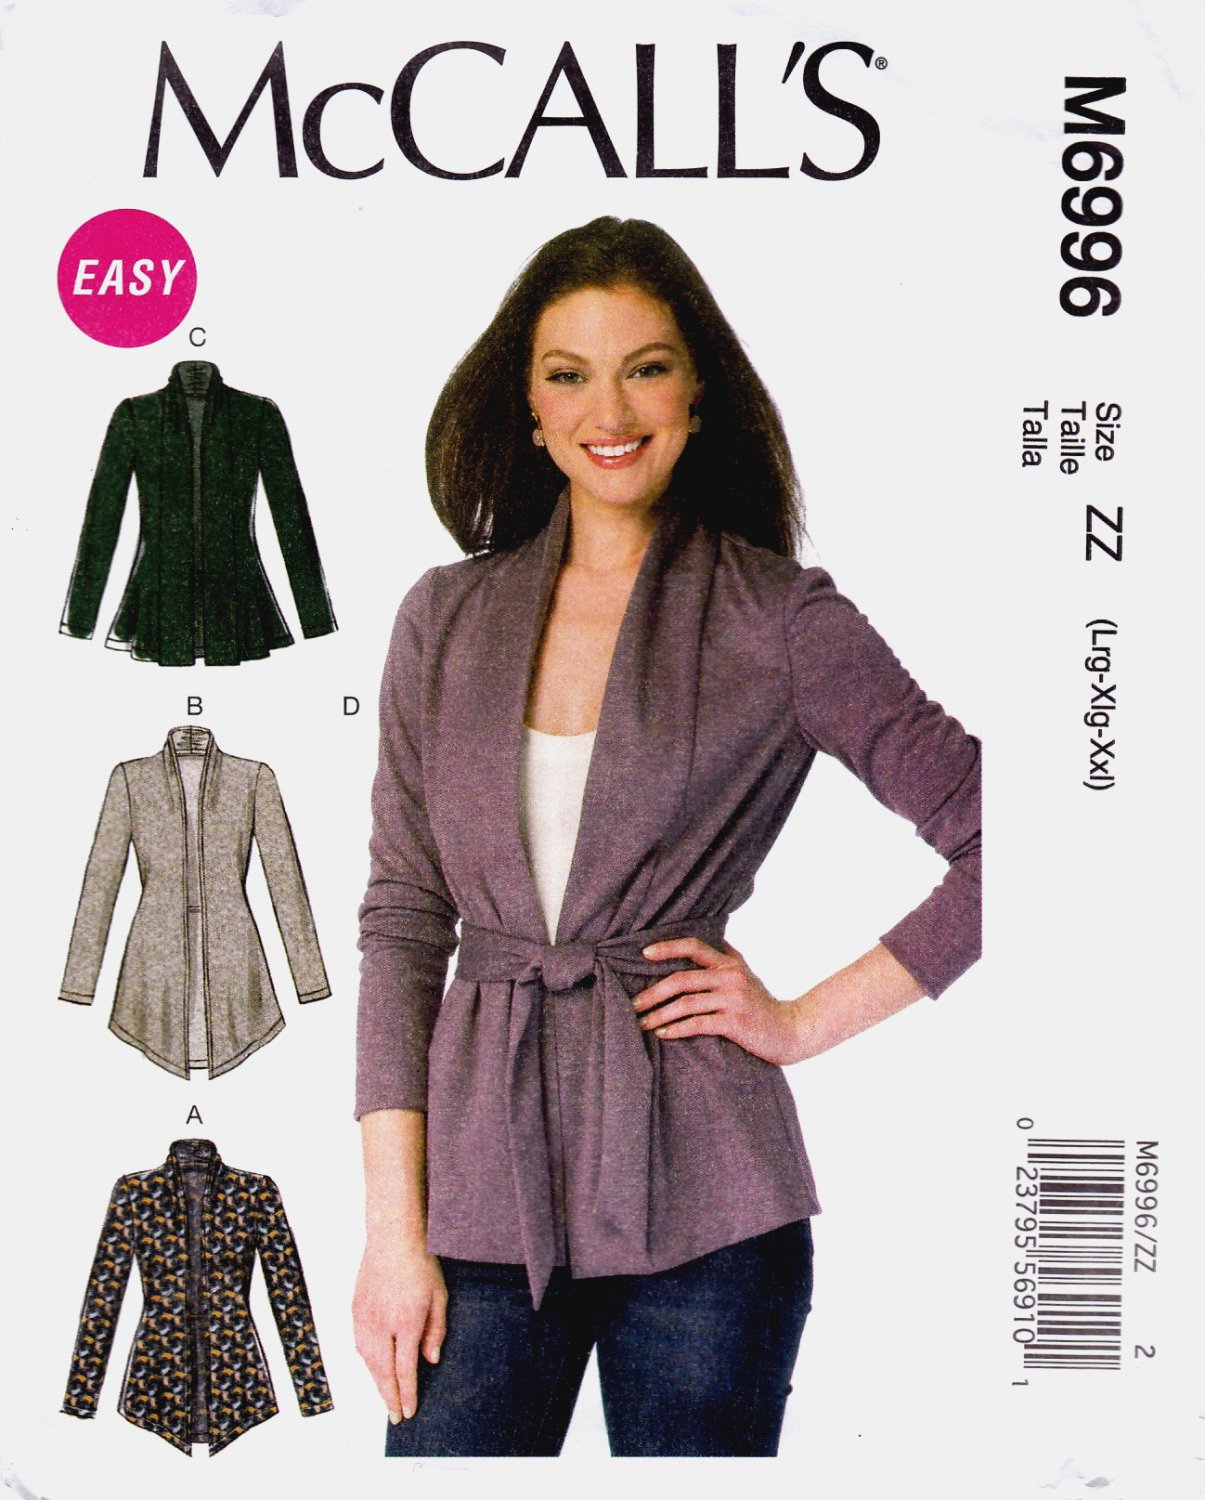 McCall's M6996 Misses Jackets Belts Long Sleeves Sewing Pattern Sizes Lrg-Xlg-Xxl